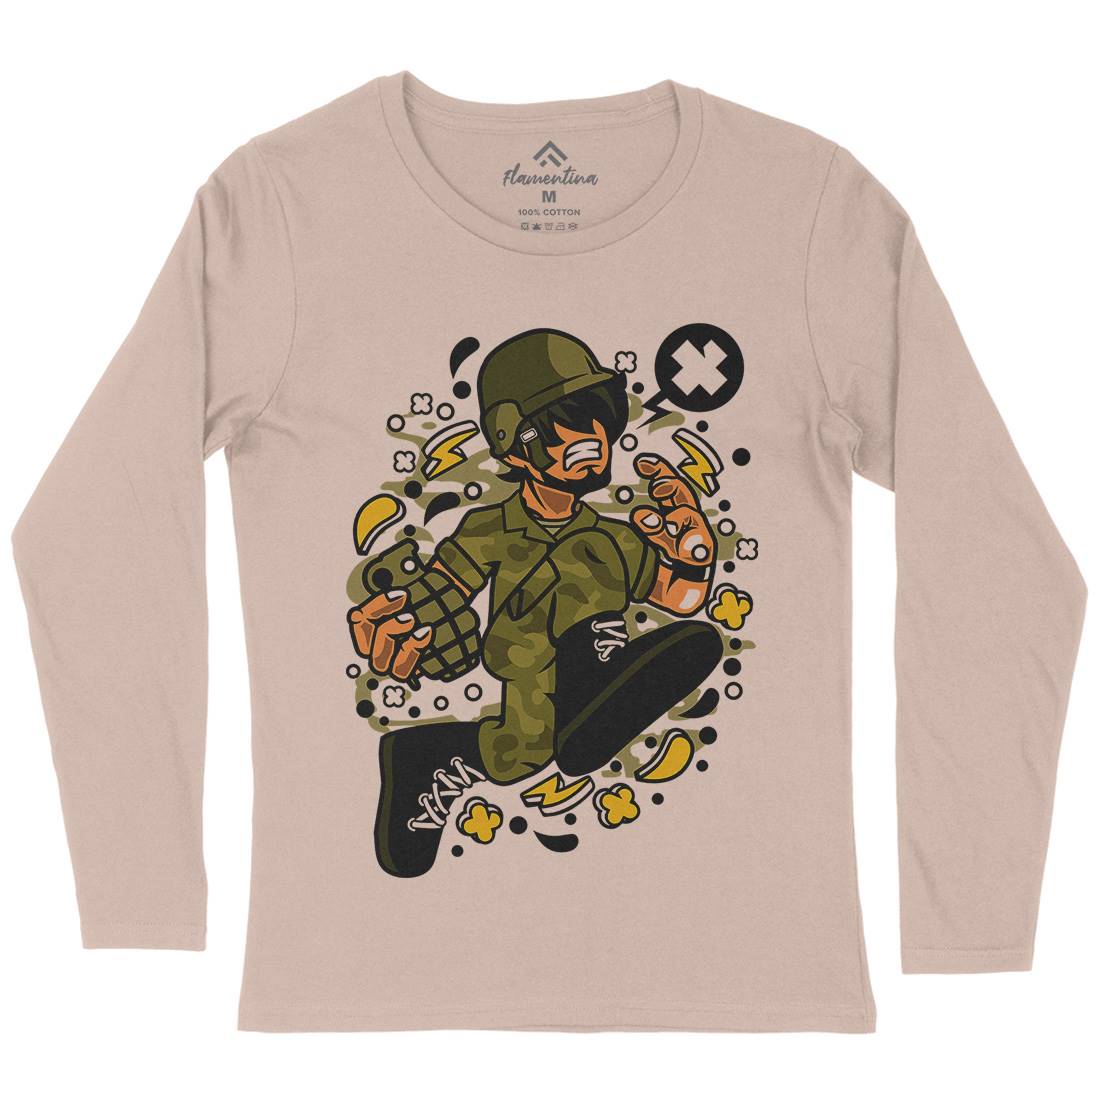 Soldier Running Womens Long Sleeve T-Shirt Army C663